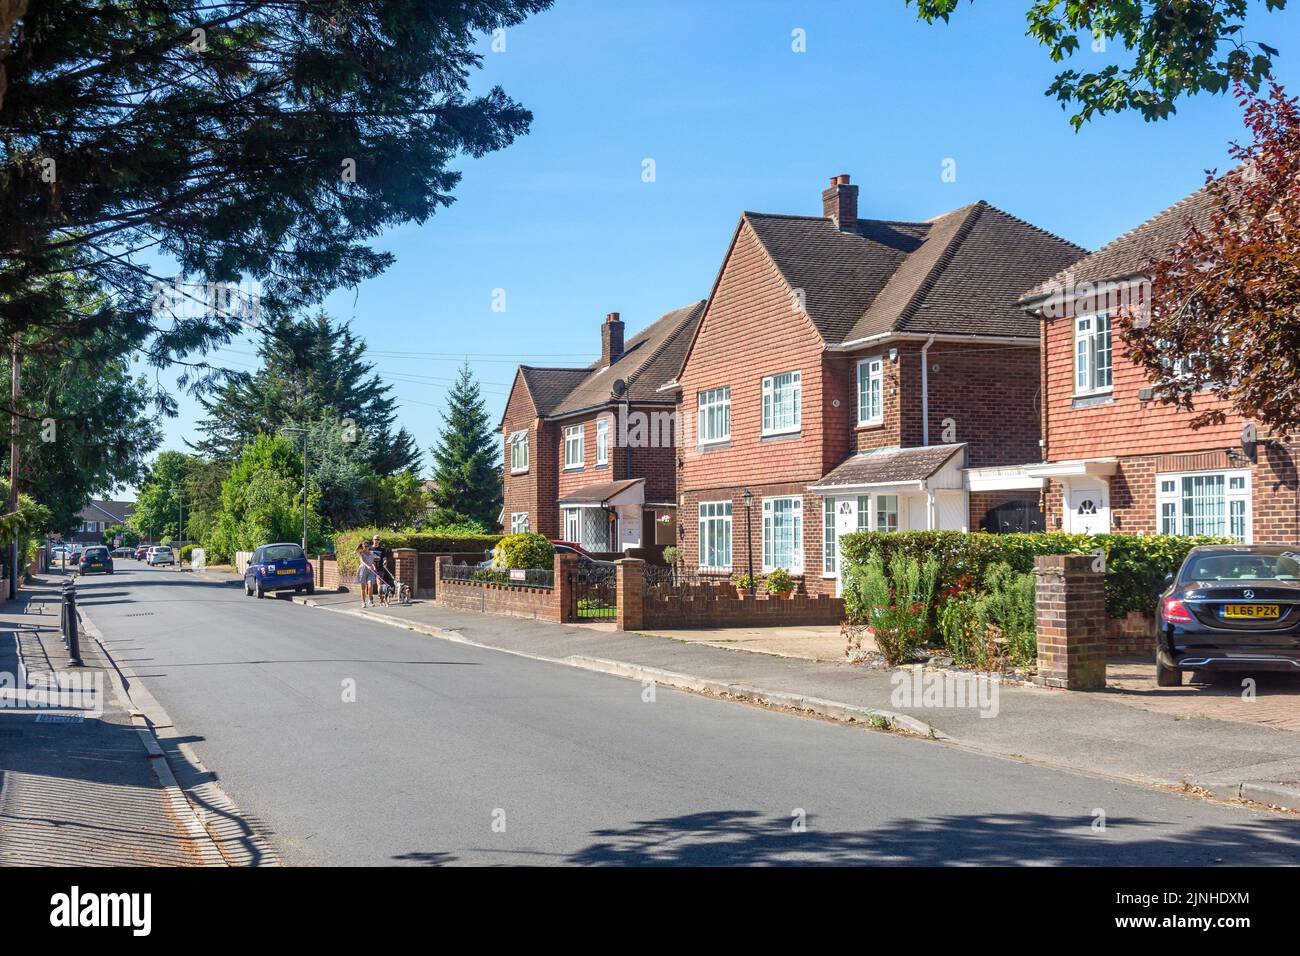 Hithermoor, Stanwell Moor Road, Surrey, Angleterre, Royaume-Uni Banque D'Images